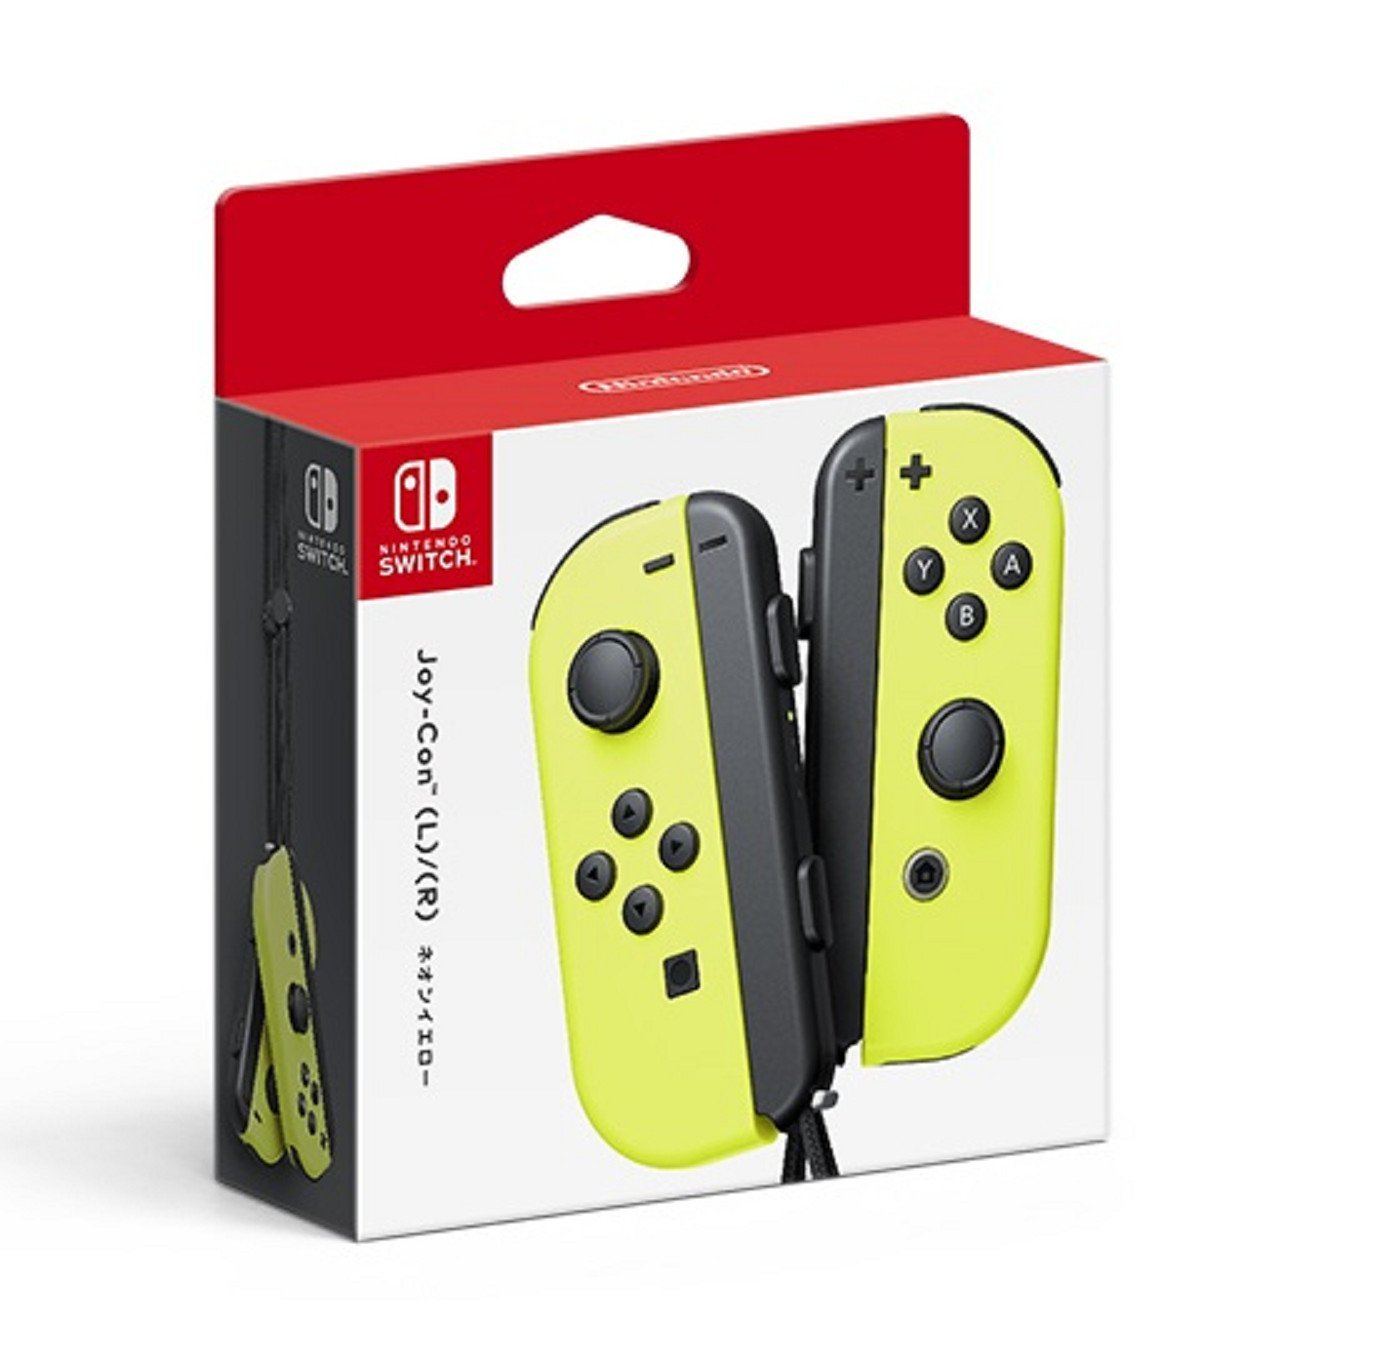 Nintendo Switch Joy-Con Controllers (Neon Red/ Neon Blue) for 